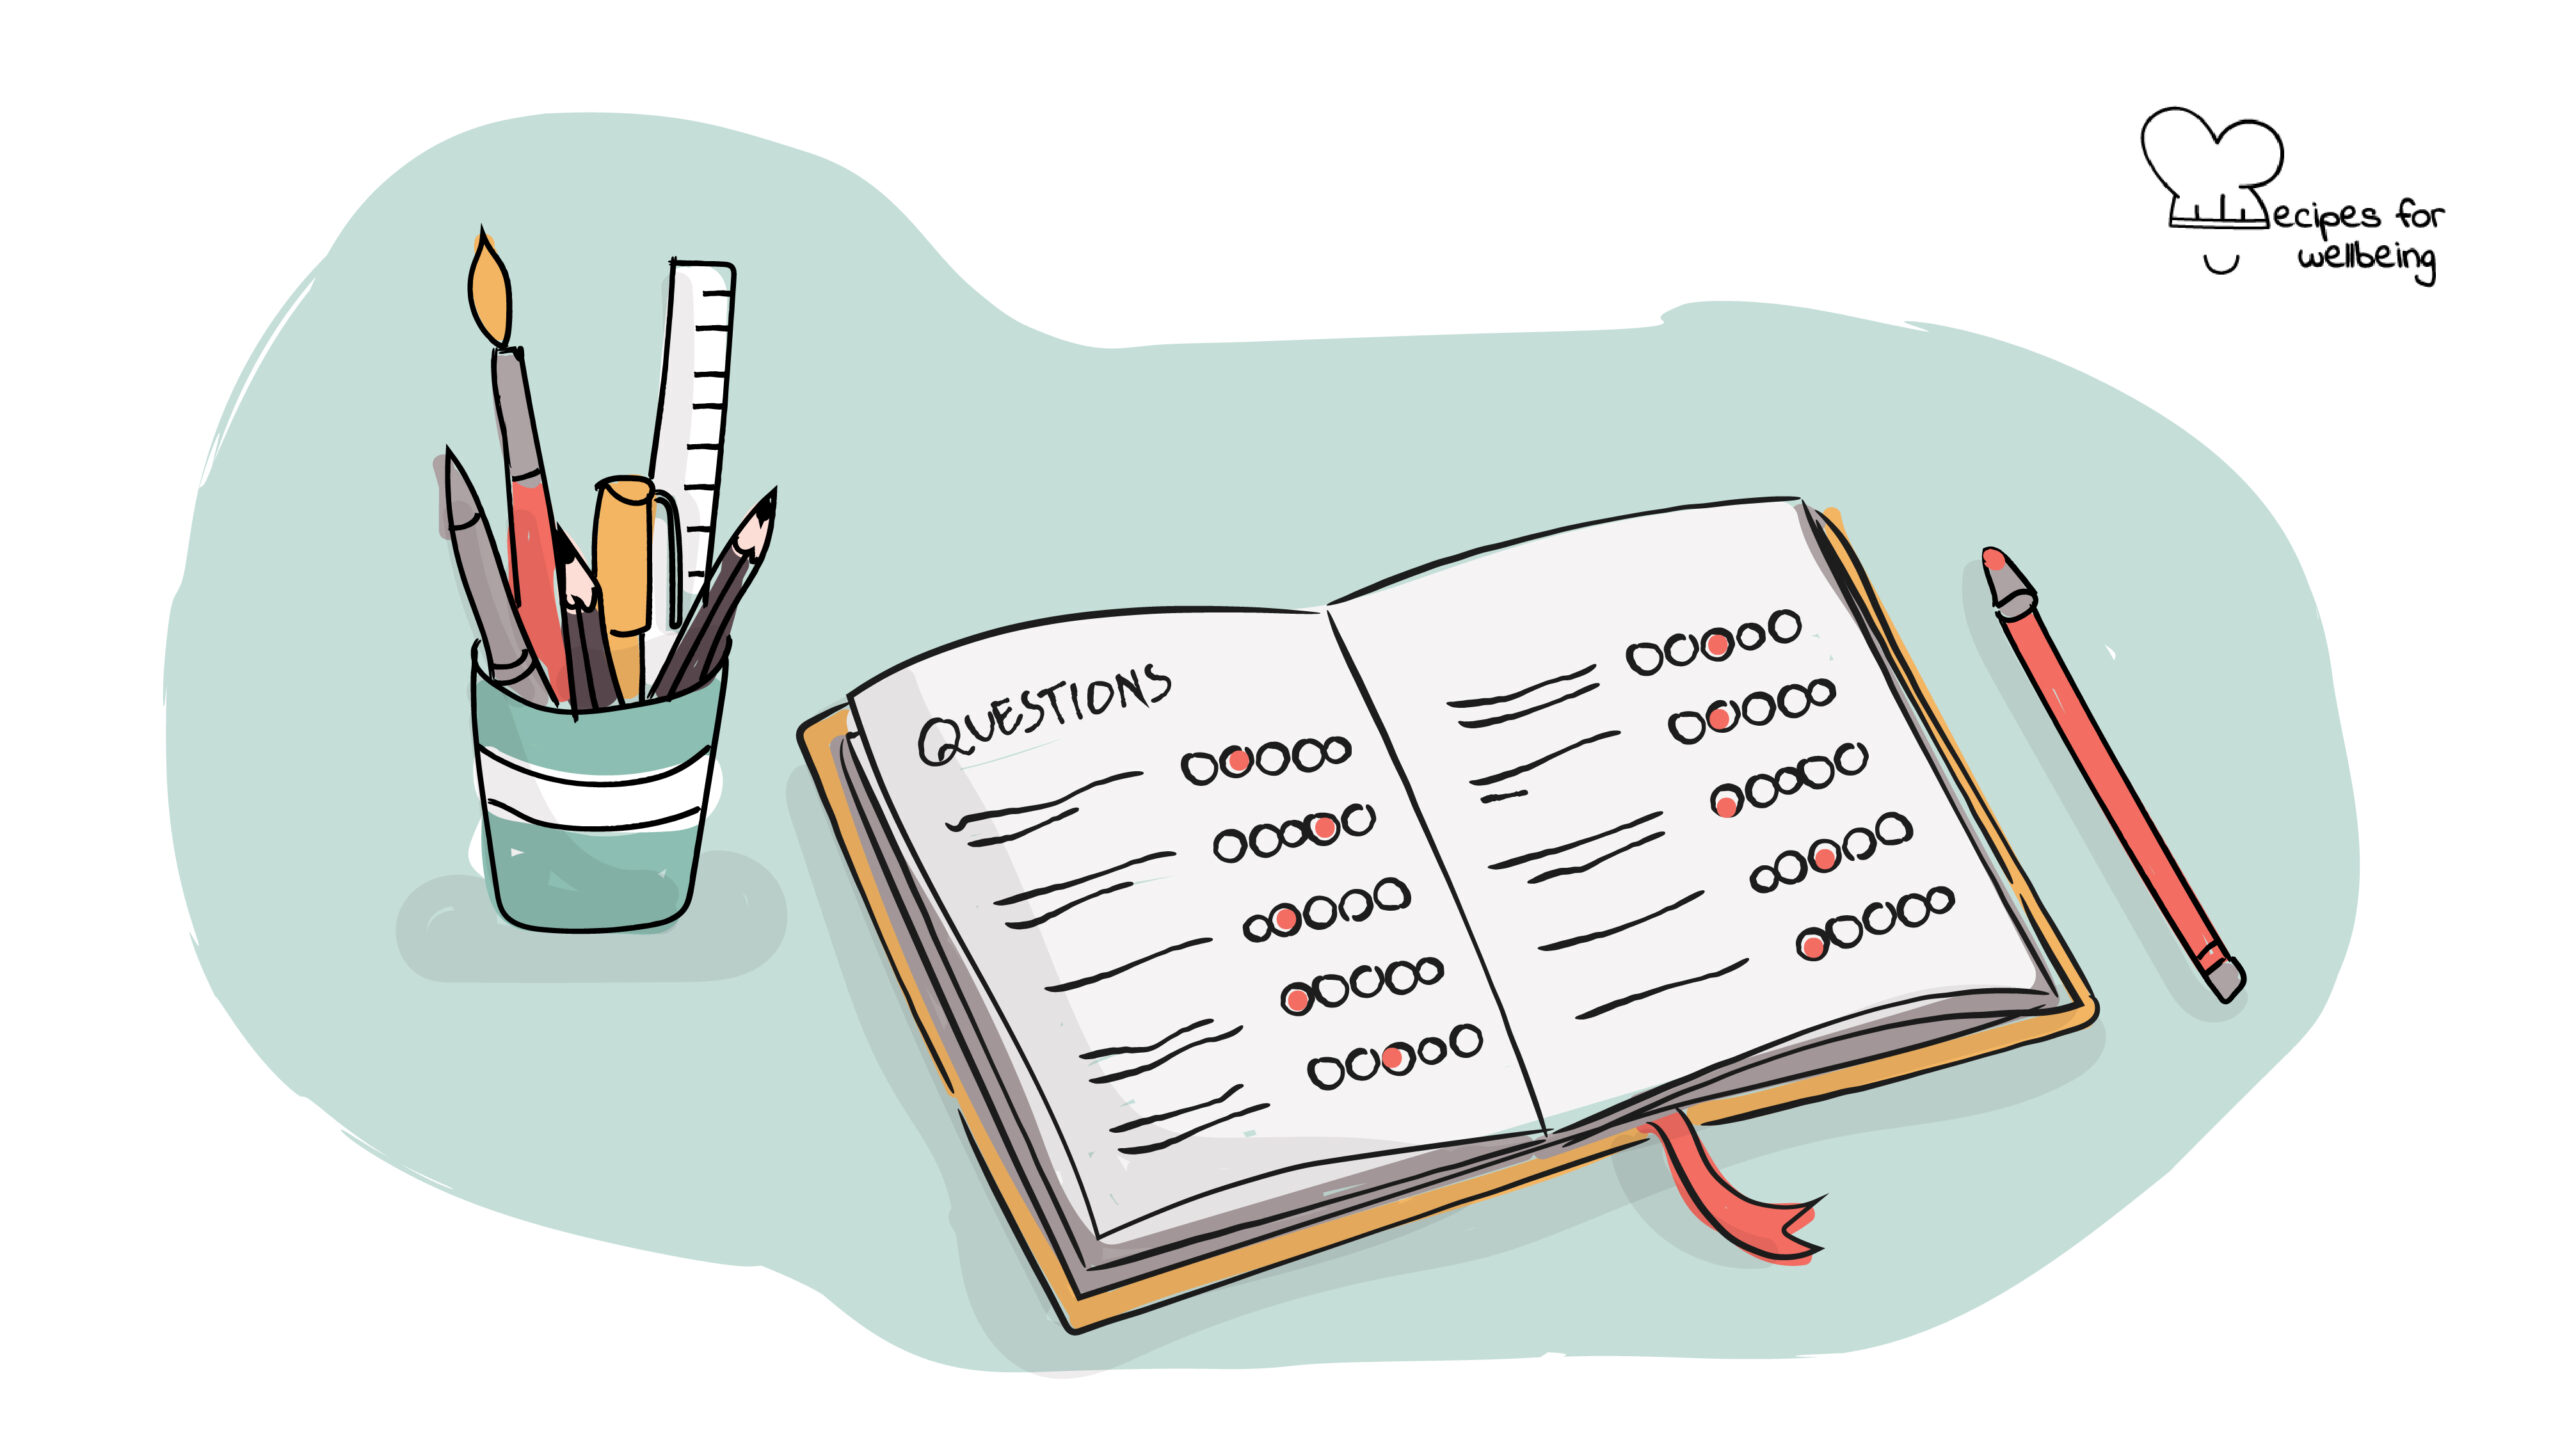 Illustration of an open notebook with a set of pencils next to it. © Recipes for Wellbeing